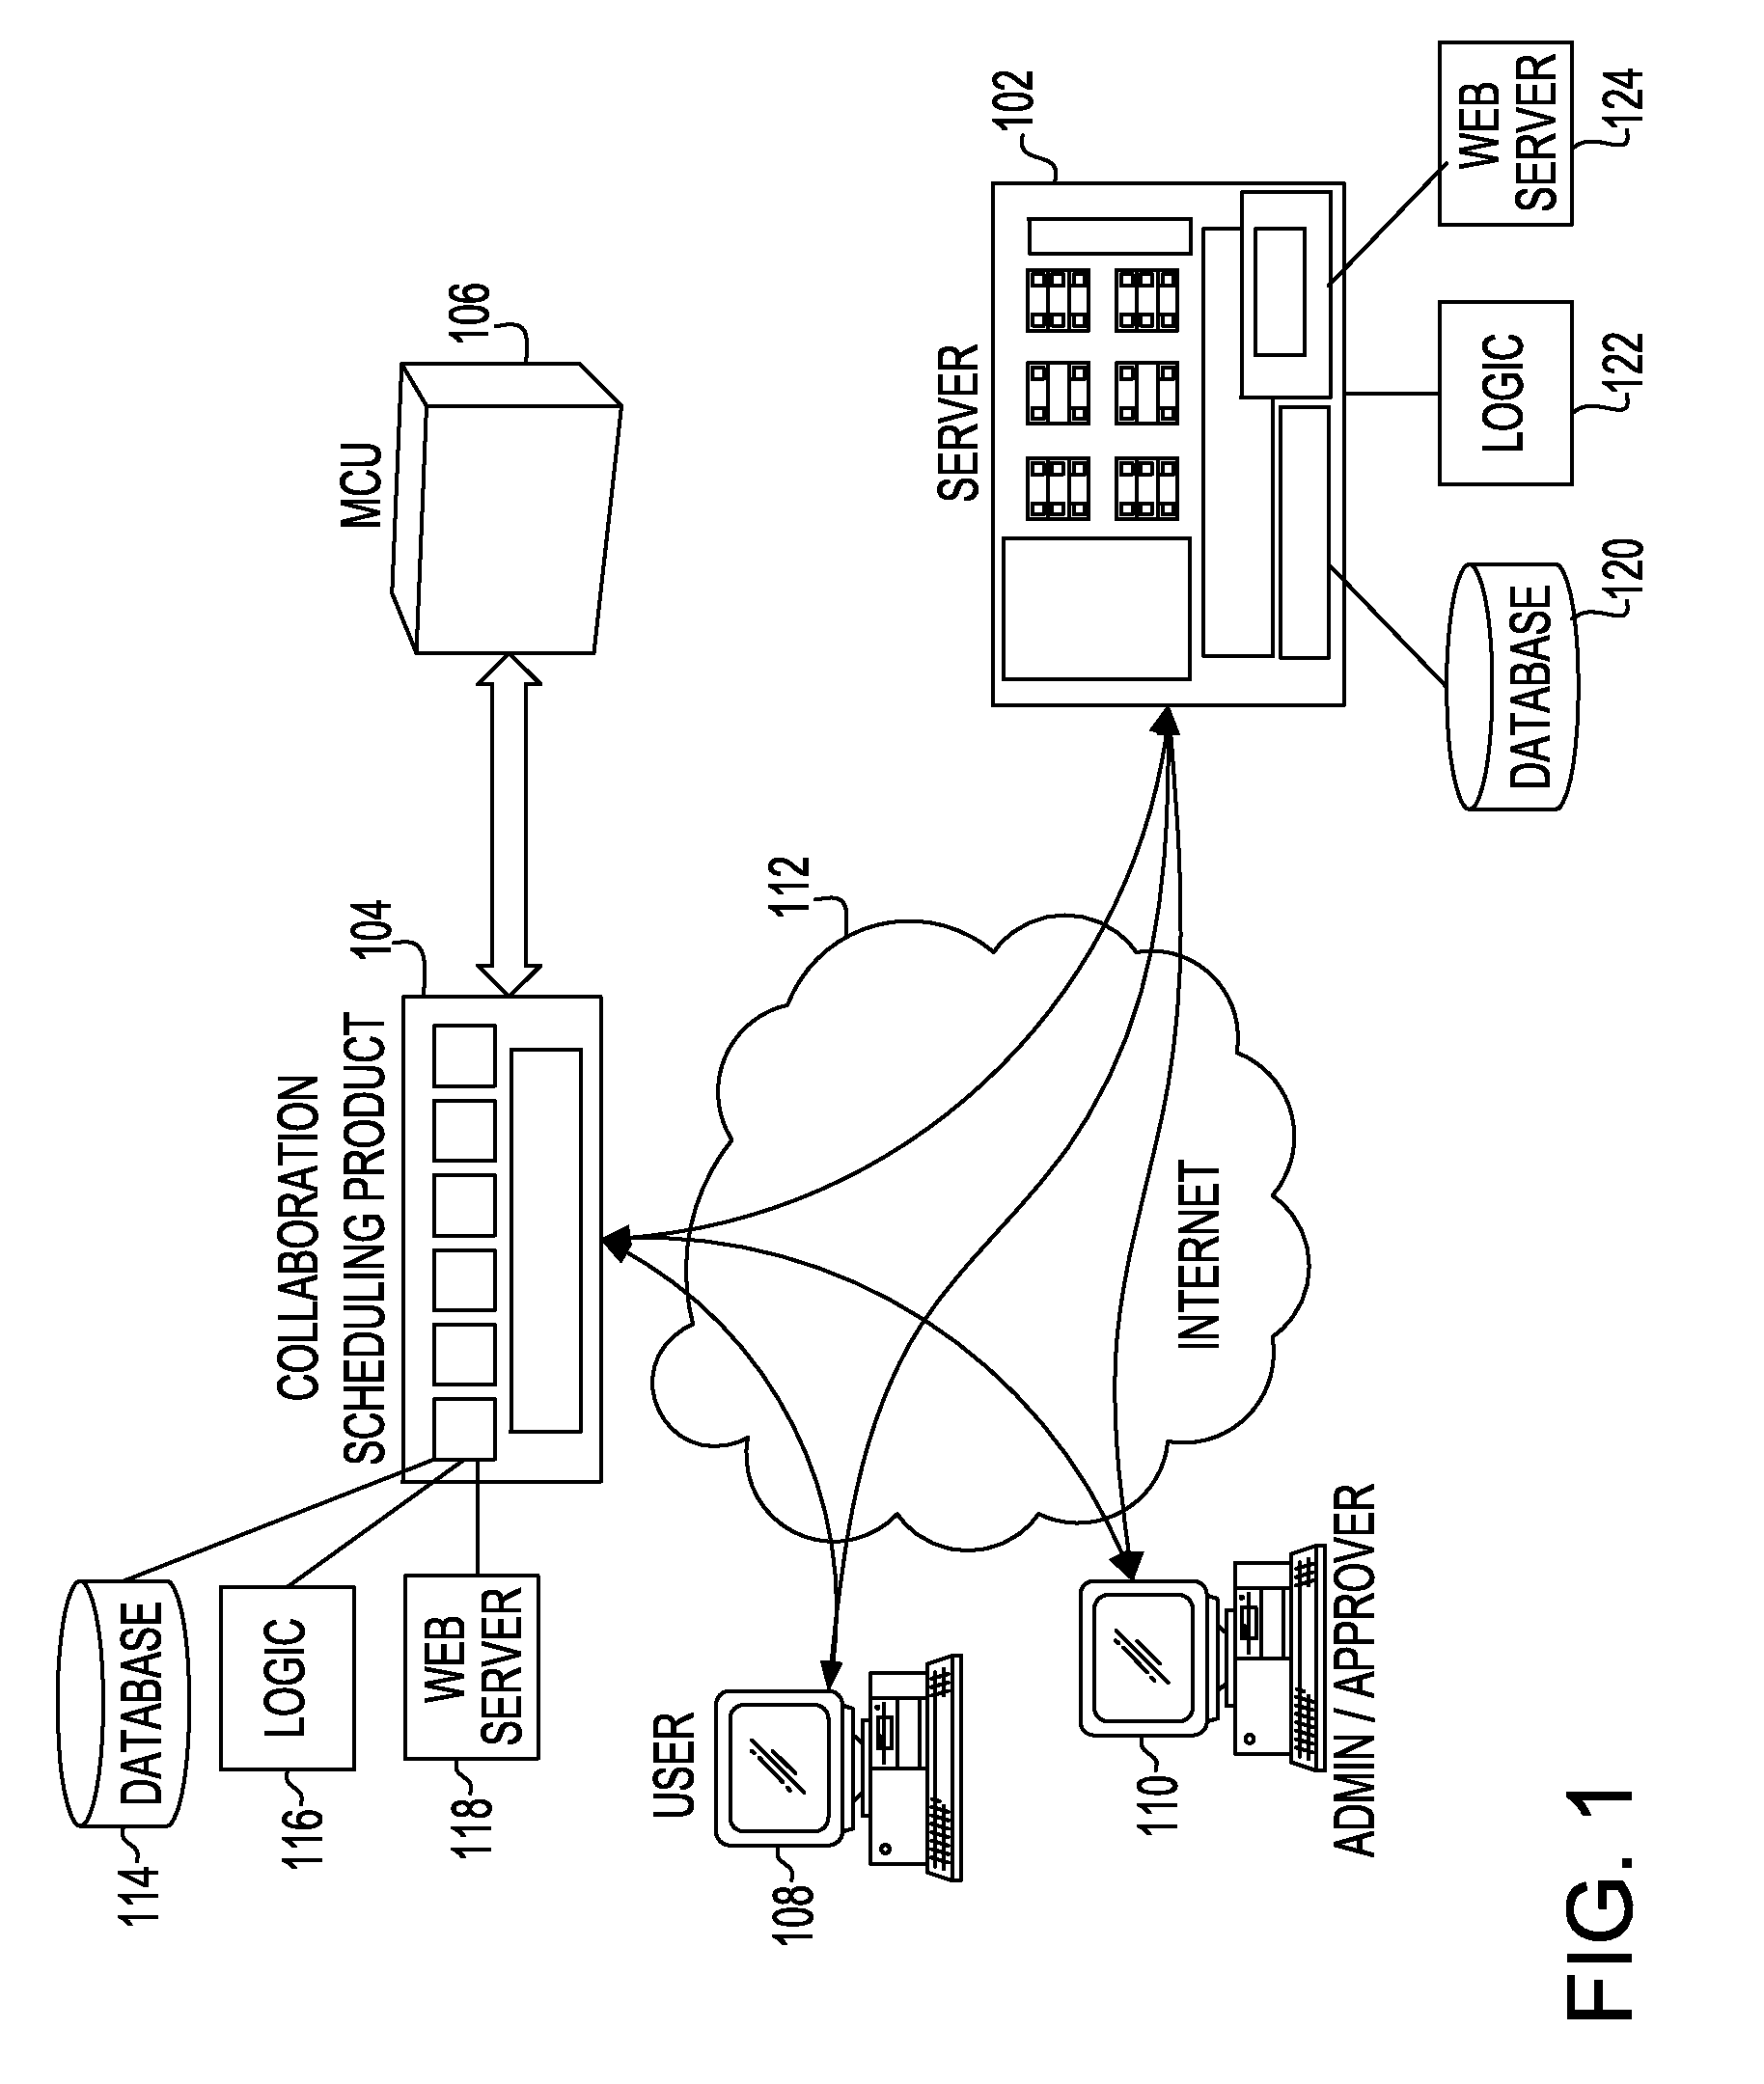 System and method for quantifying and using virtual travel mileage